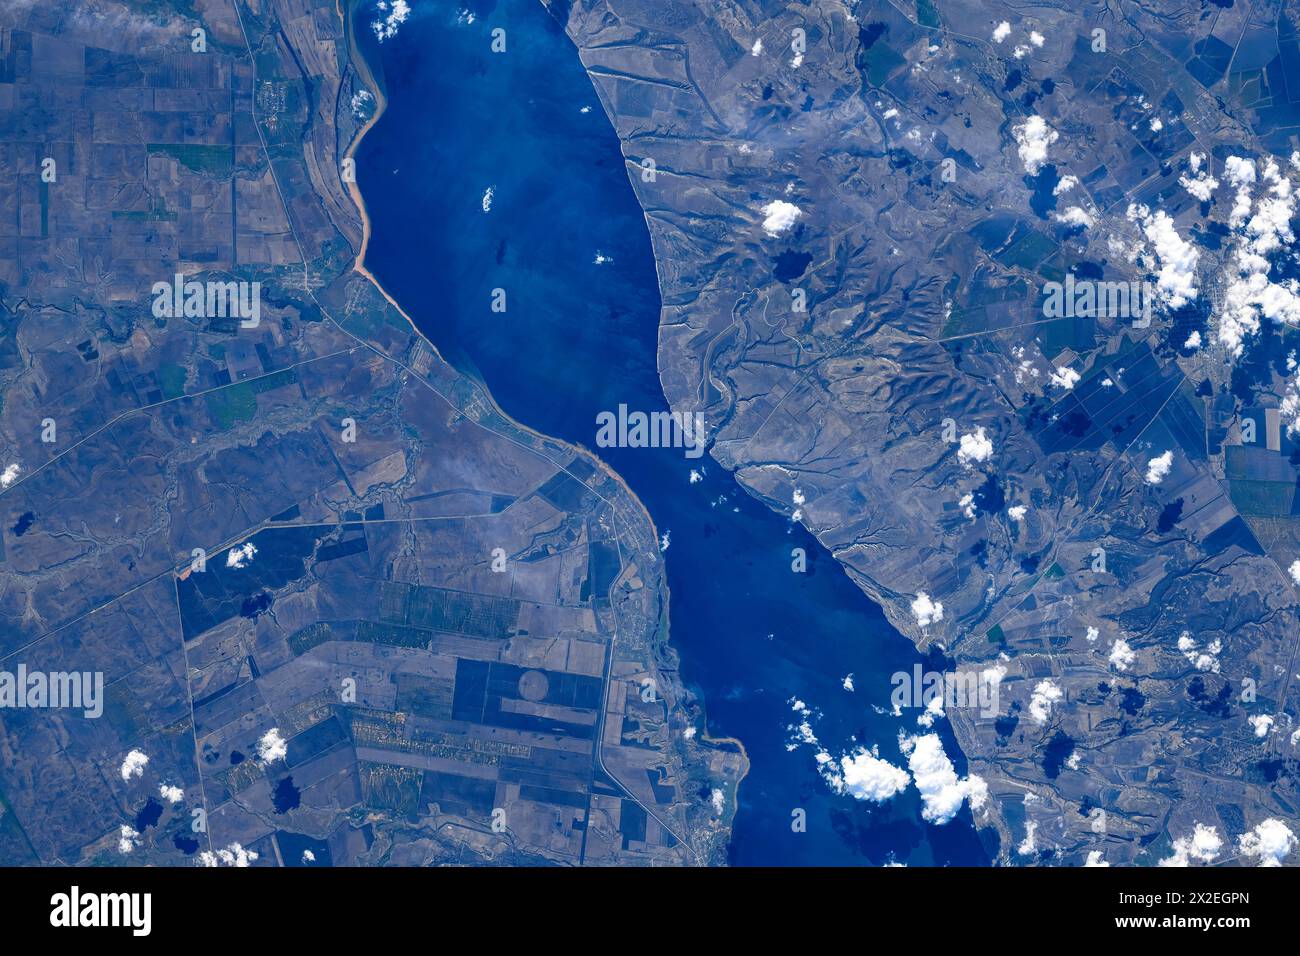 River and land features in Kamyshin, Russia. Digital enhancement of an image by NASA Stock Photo